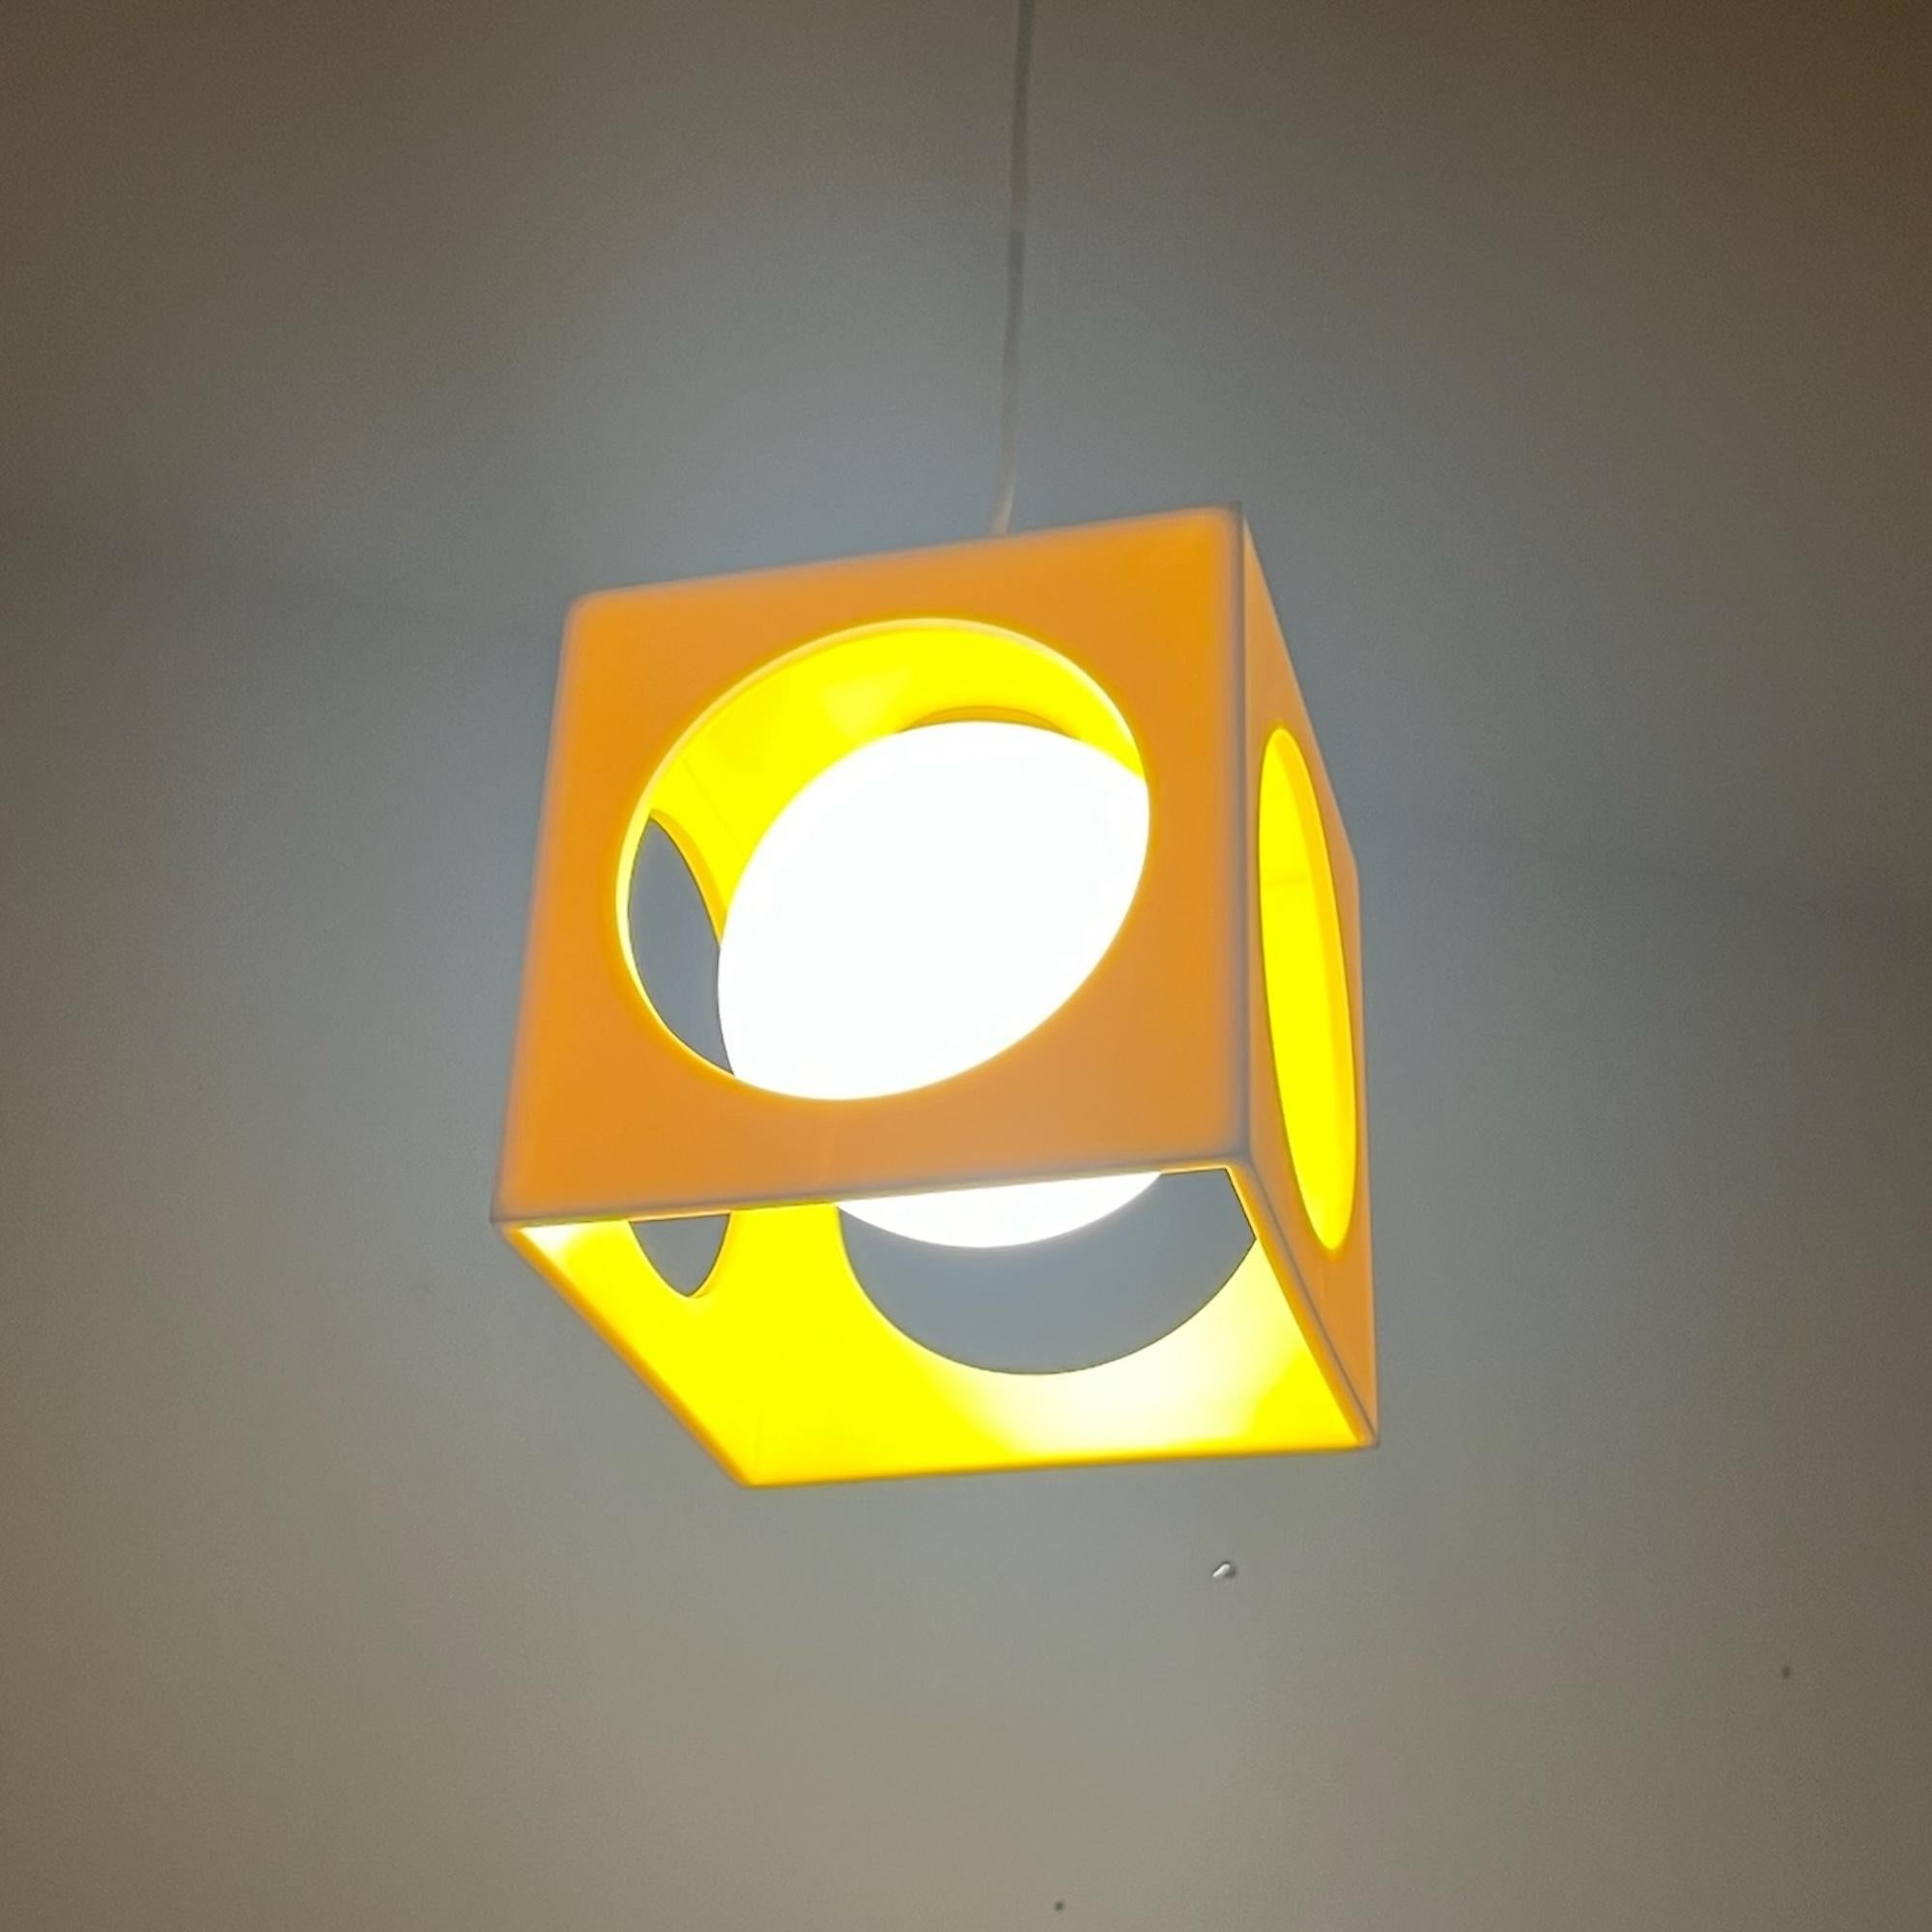 Illuminate your space with this striking space age lamp designed by Richard Essig Besigheim. This unique hanging lamp features a glossy yellow plastic cube with rounded holes, perfectly housing a sphere of opaline white glass. The combination of